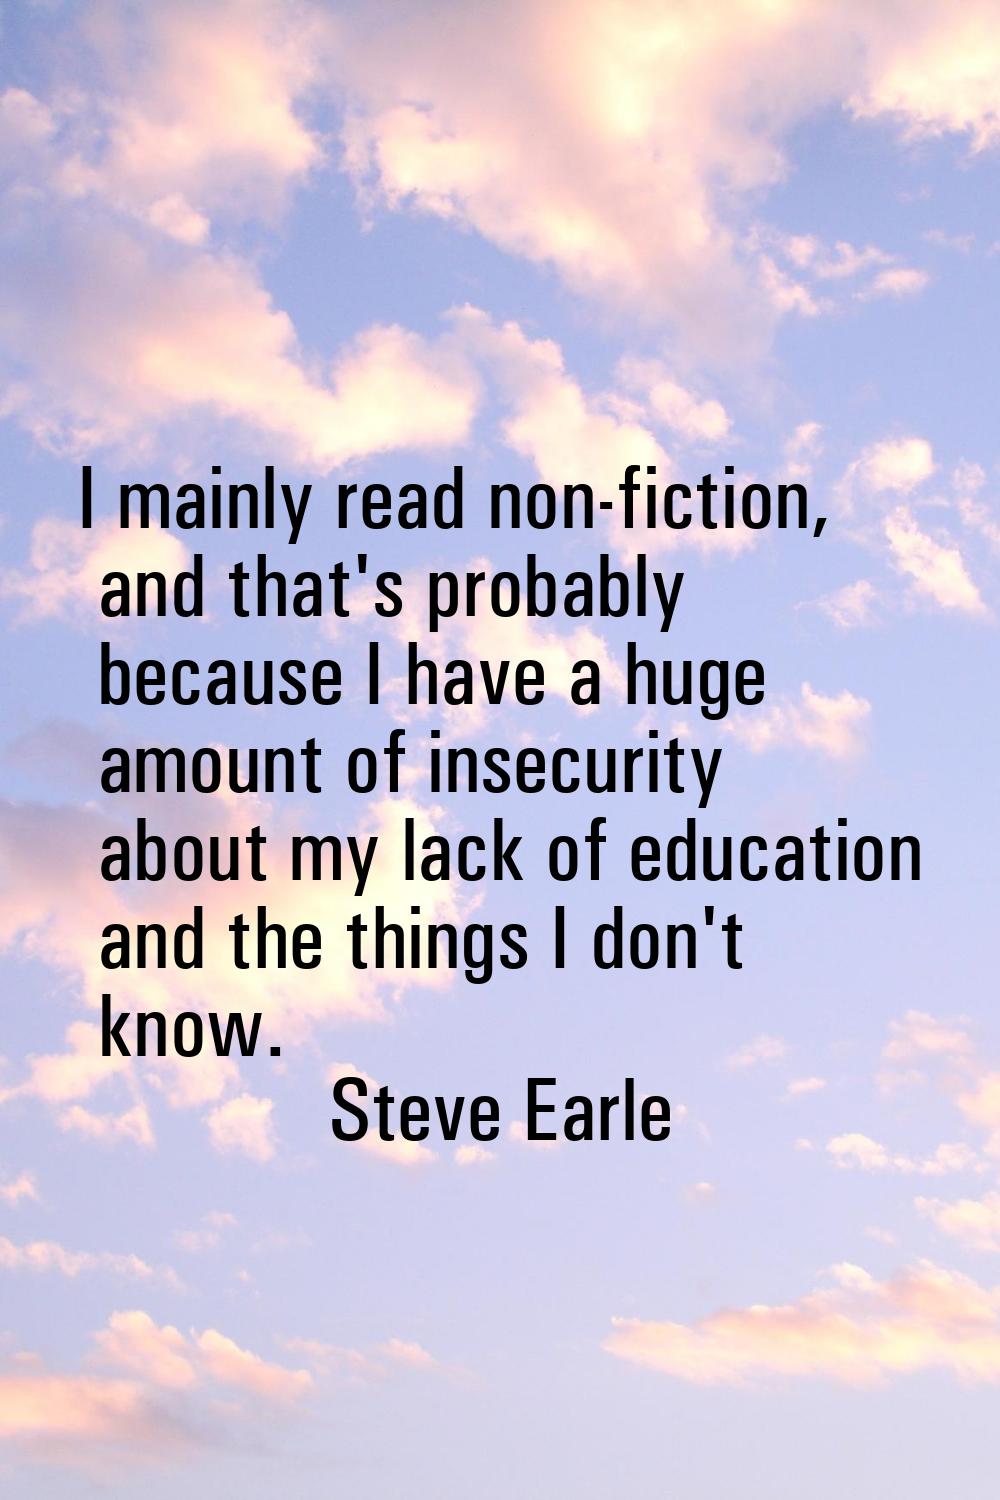 I mainly read non-fiction, and that's probably because I have a huge amount of insecurity about my 